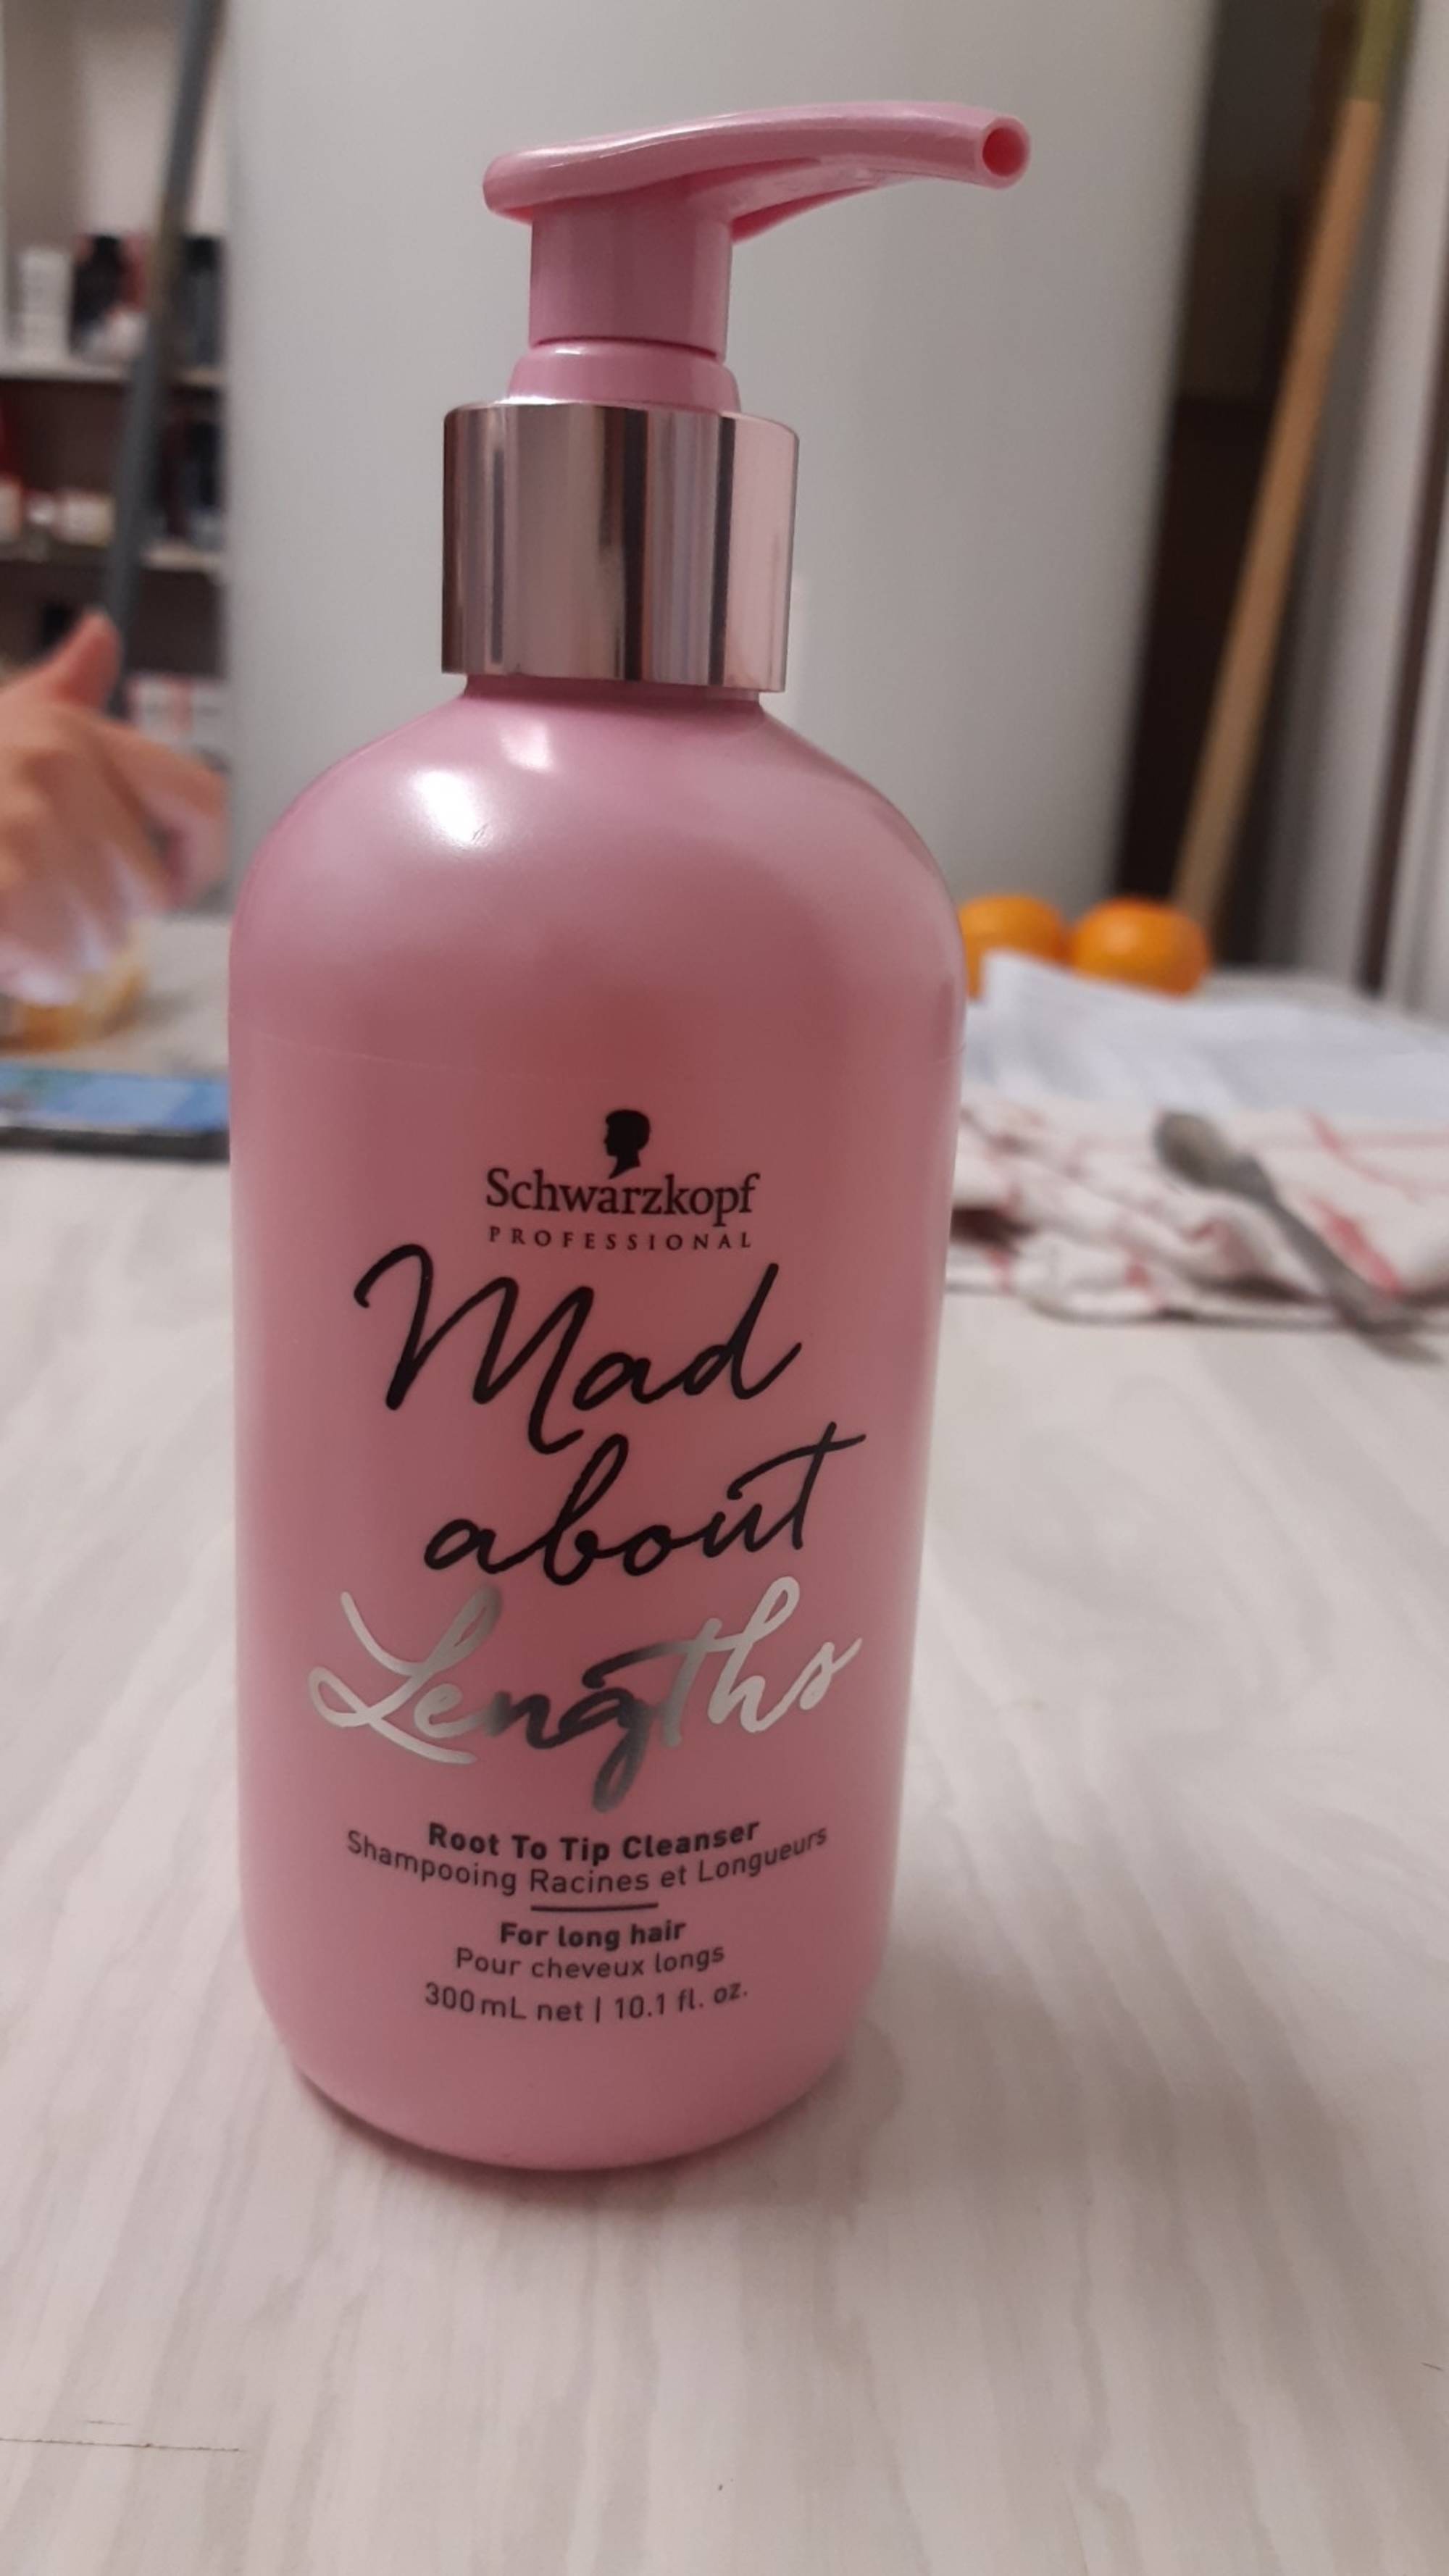 SCHWARZKOPF - Mad about lengths - Shampooing racines et longueurs